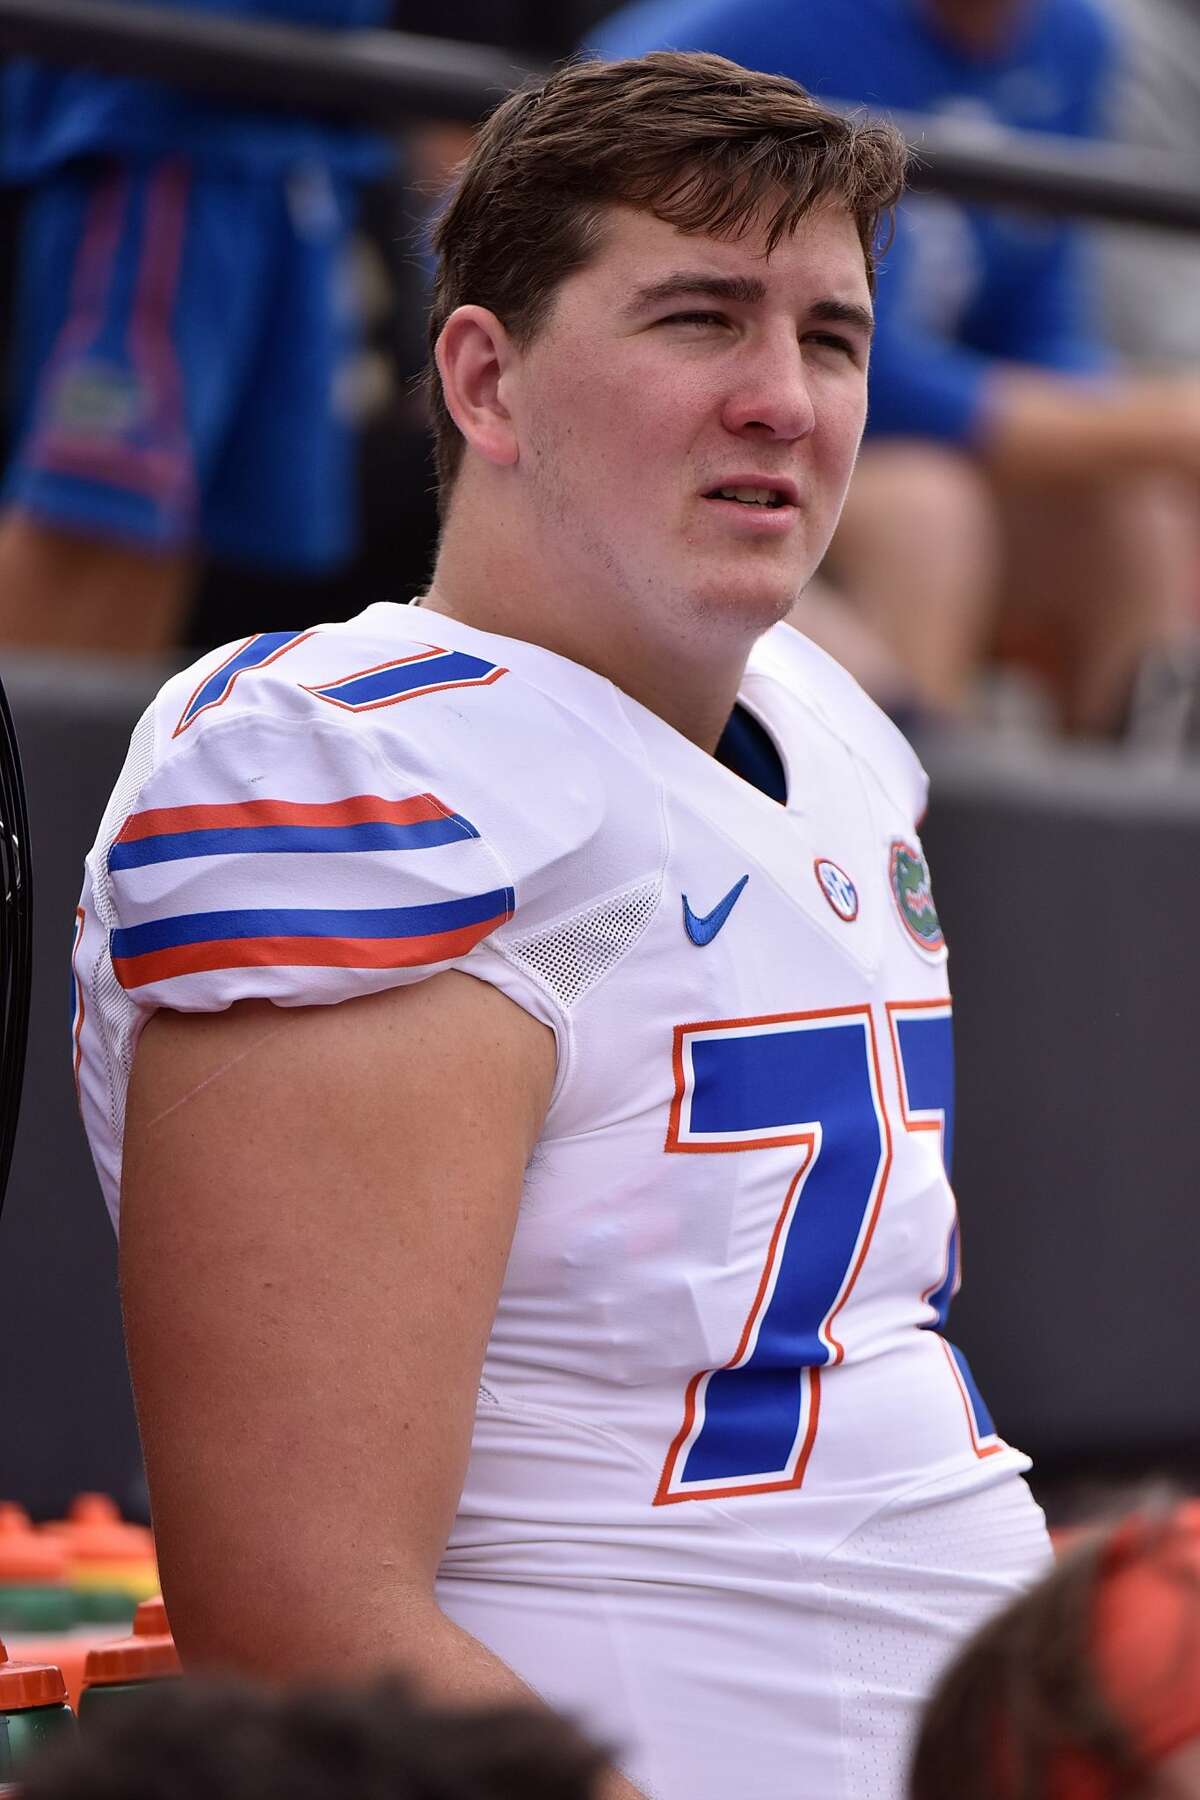 NASHVILLE, TN - OCTOBER 01: Andrew Mike #77 of the Florida Gators watches from the sideline during a game against the Vanderbilt Commodores at Vanderbilt Stadium on October 1, 2016 in Nashville, Tennessee. (Photo by Frederick Breedon/Getty Images)